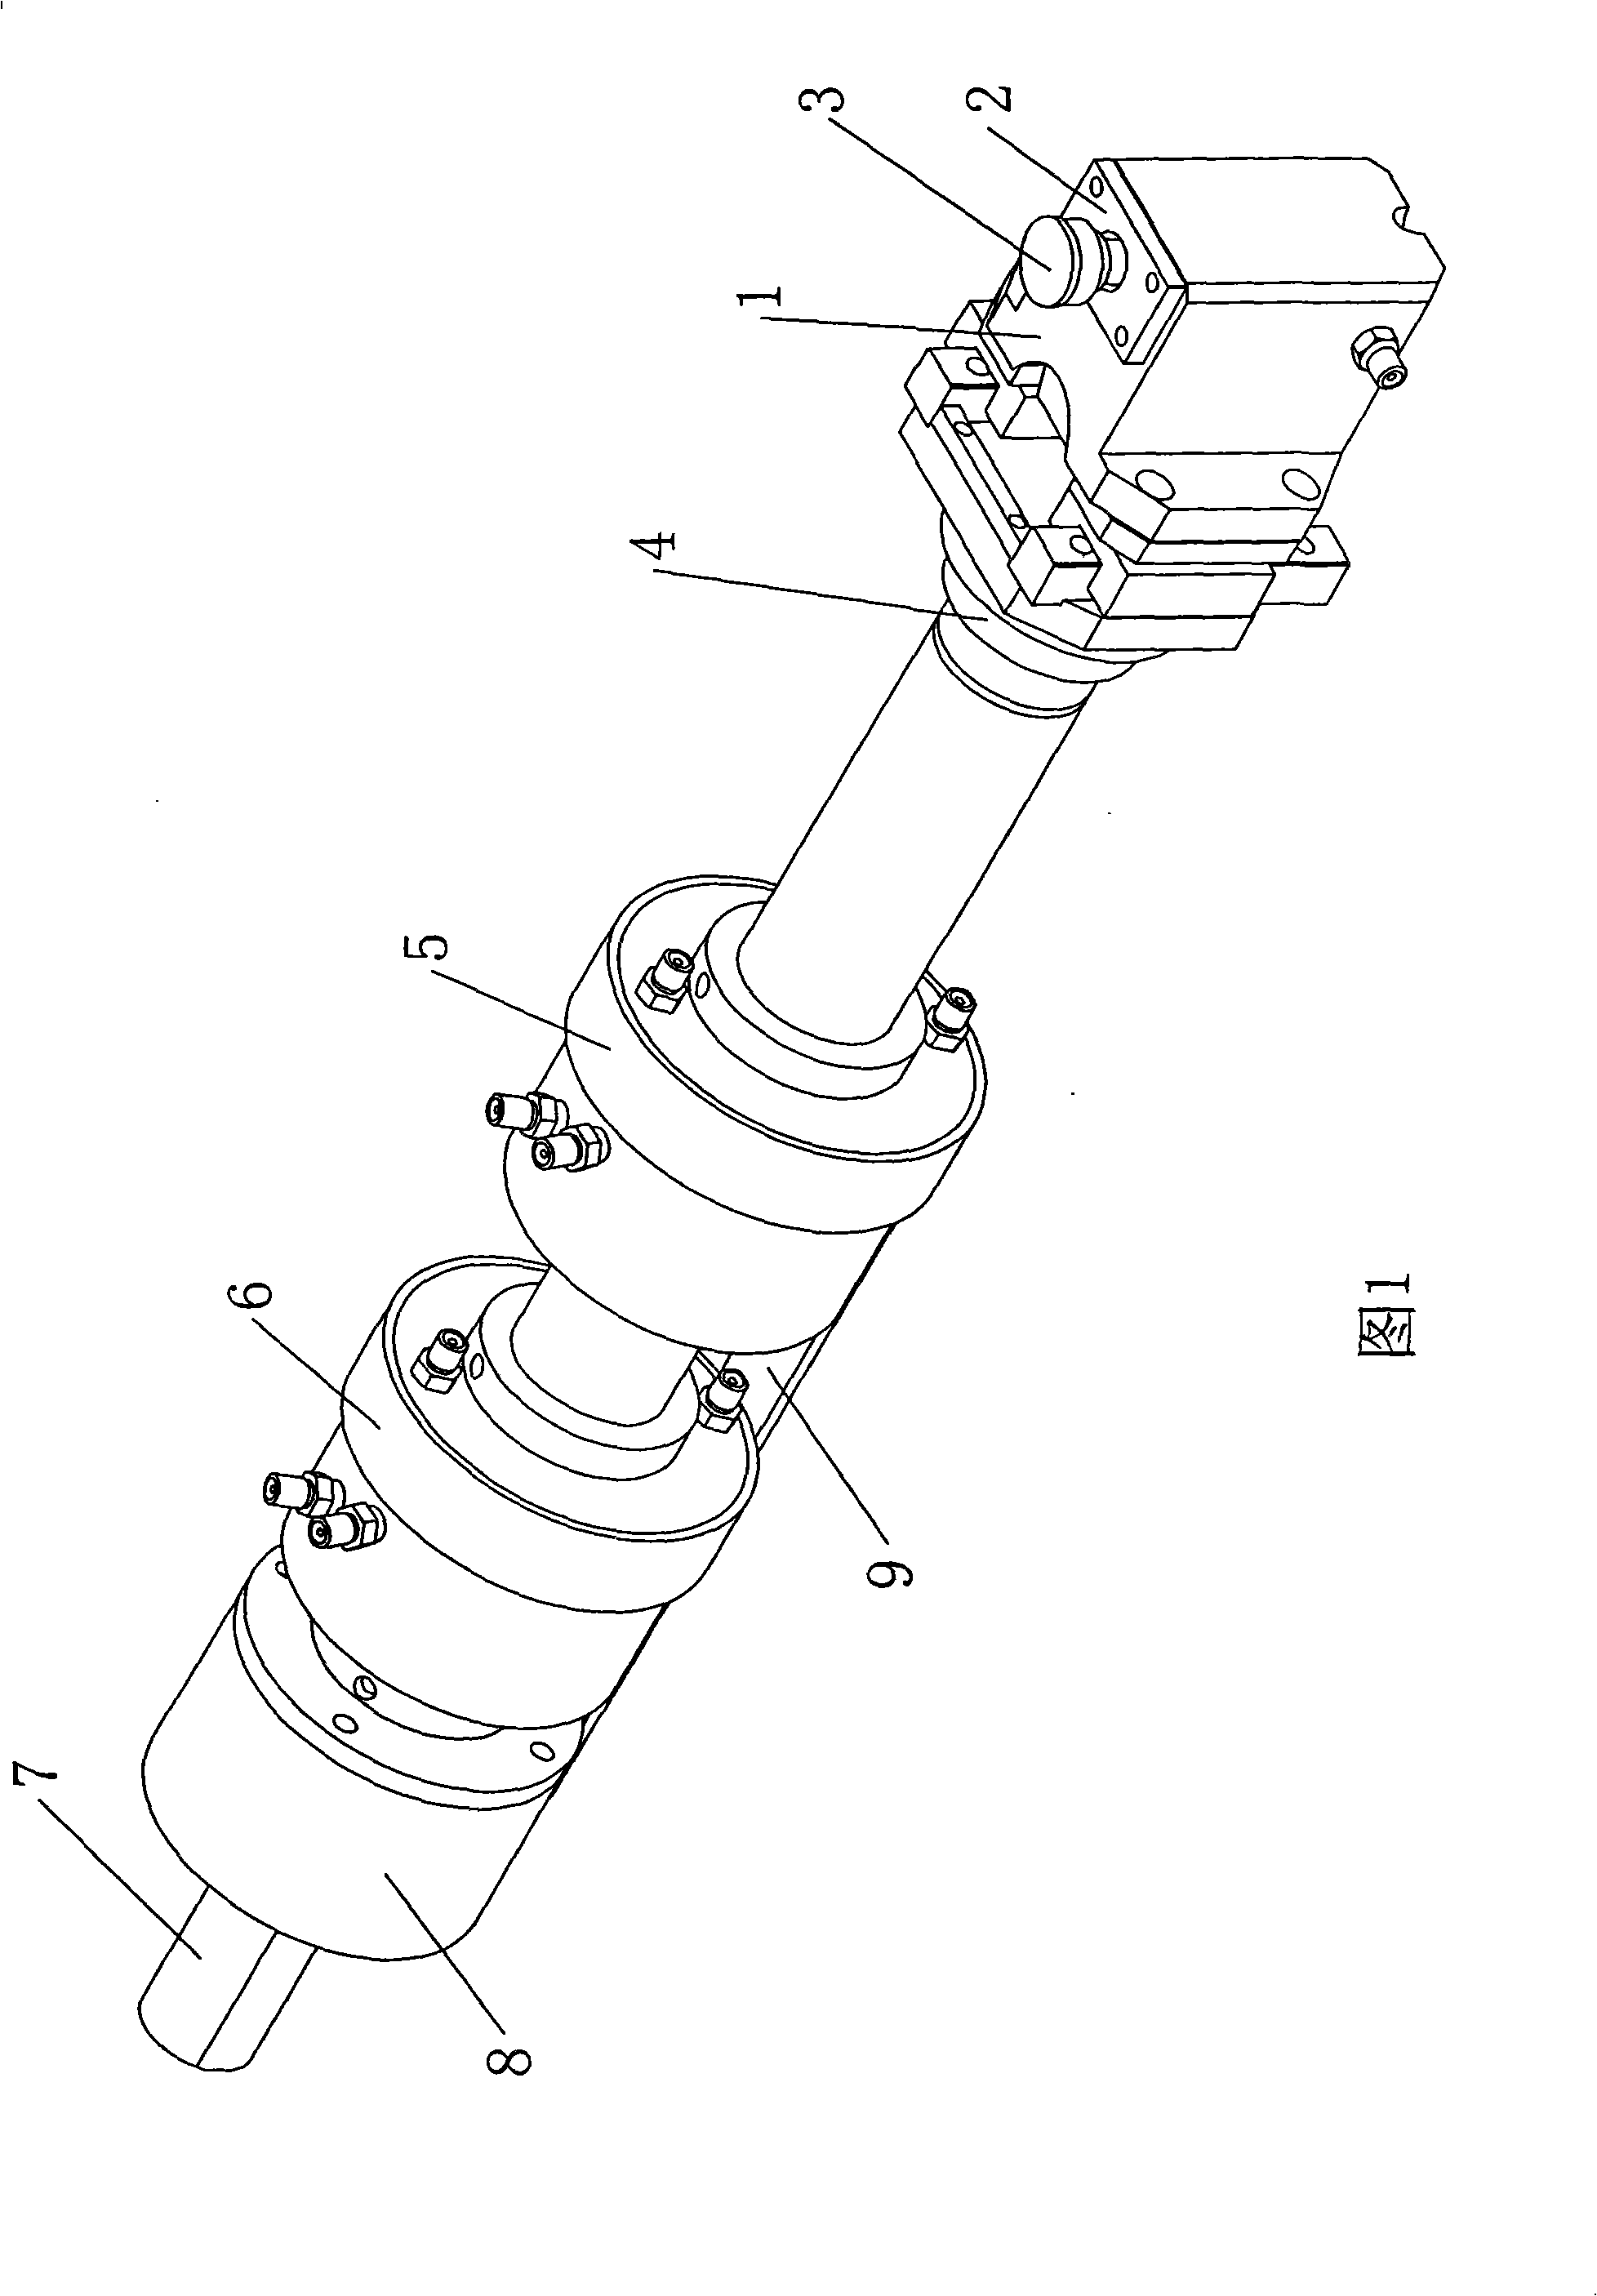 Ultrasonic metallic surface processing device for borer